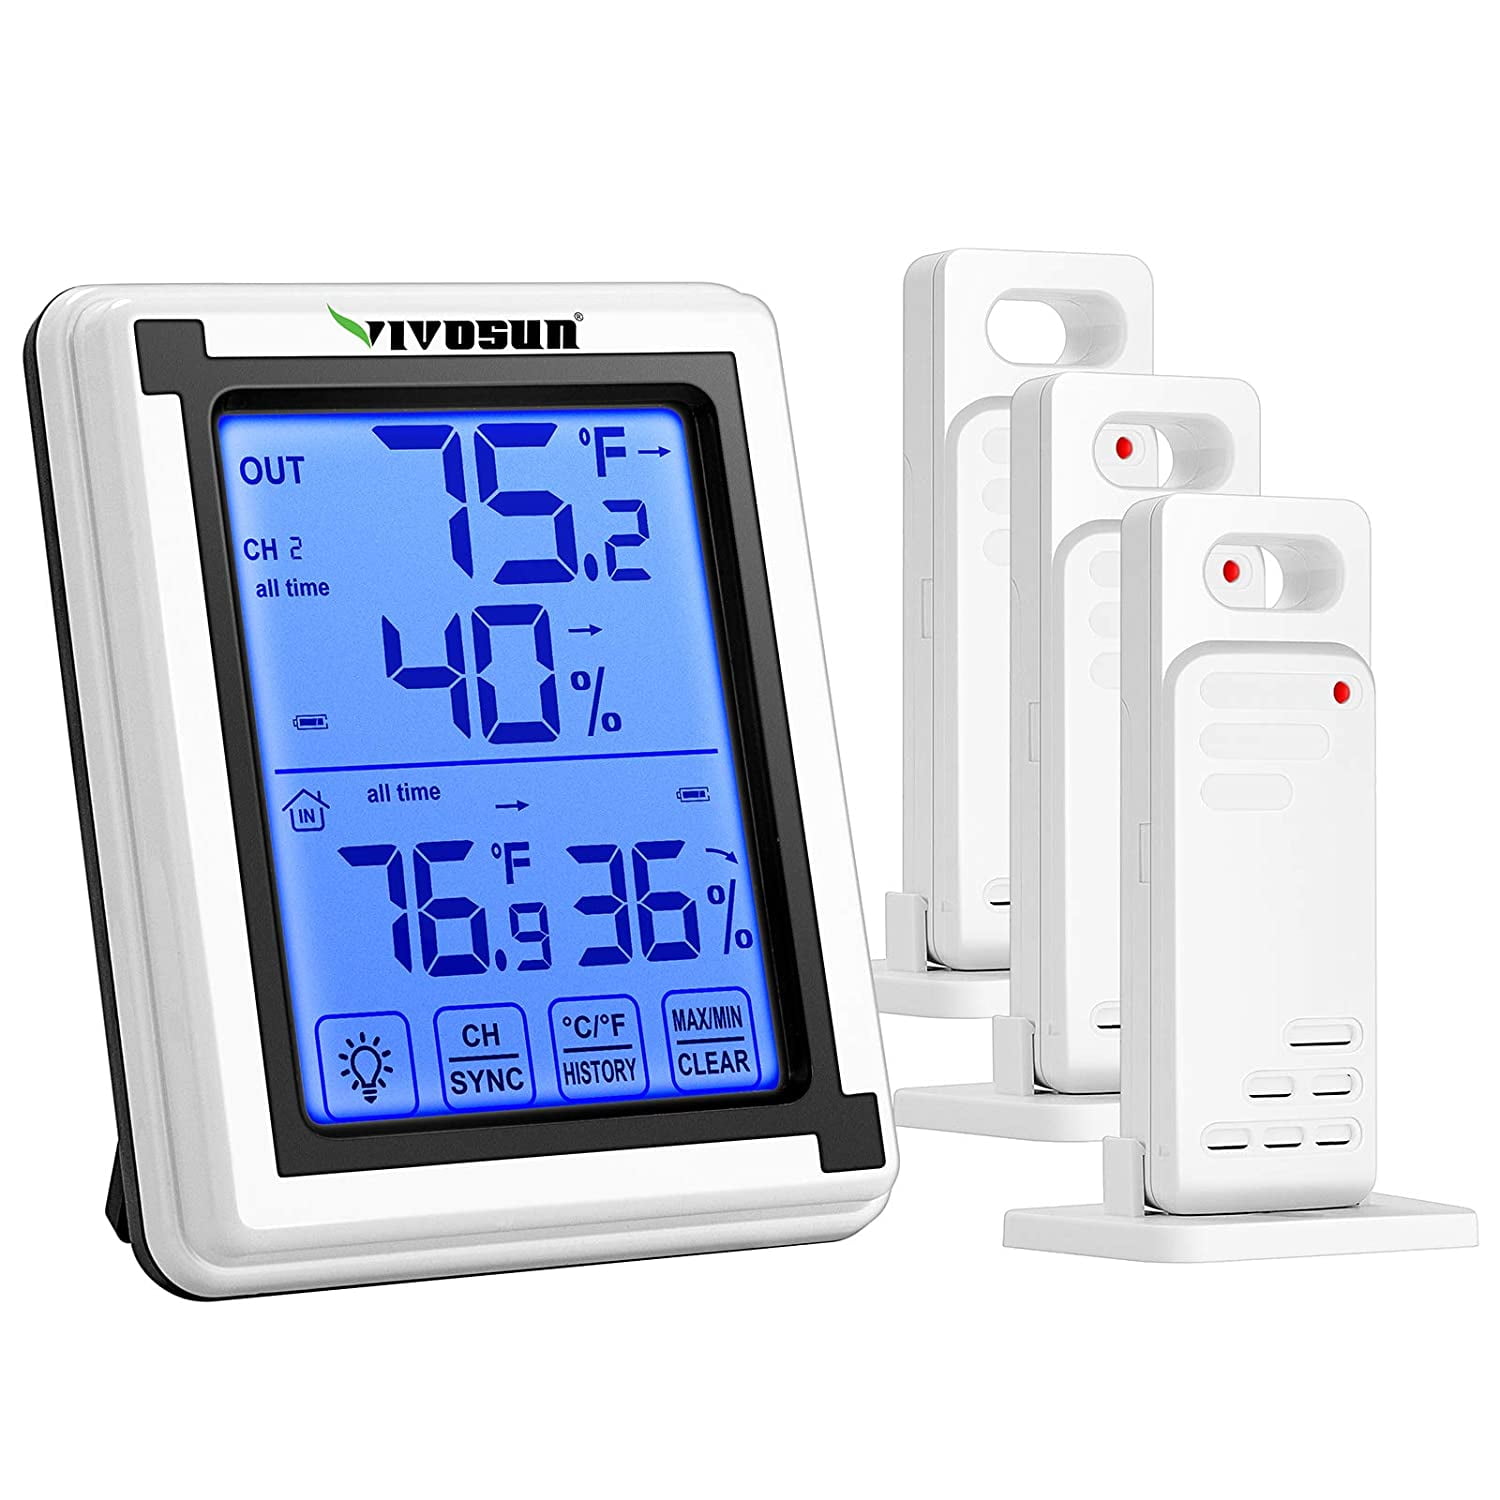 beu Almachtig Knooppunt SANDU Digital Thermometer and Hygrometer with 3 Remote Sensors, Indoor  Outdoor Temperature and Humidity Monitor with Touchscreen LCD Backlight,  200ft/60m Range, Battery Included - Walmart.com